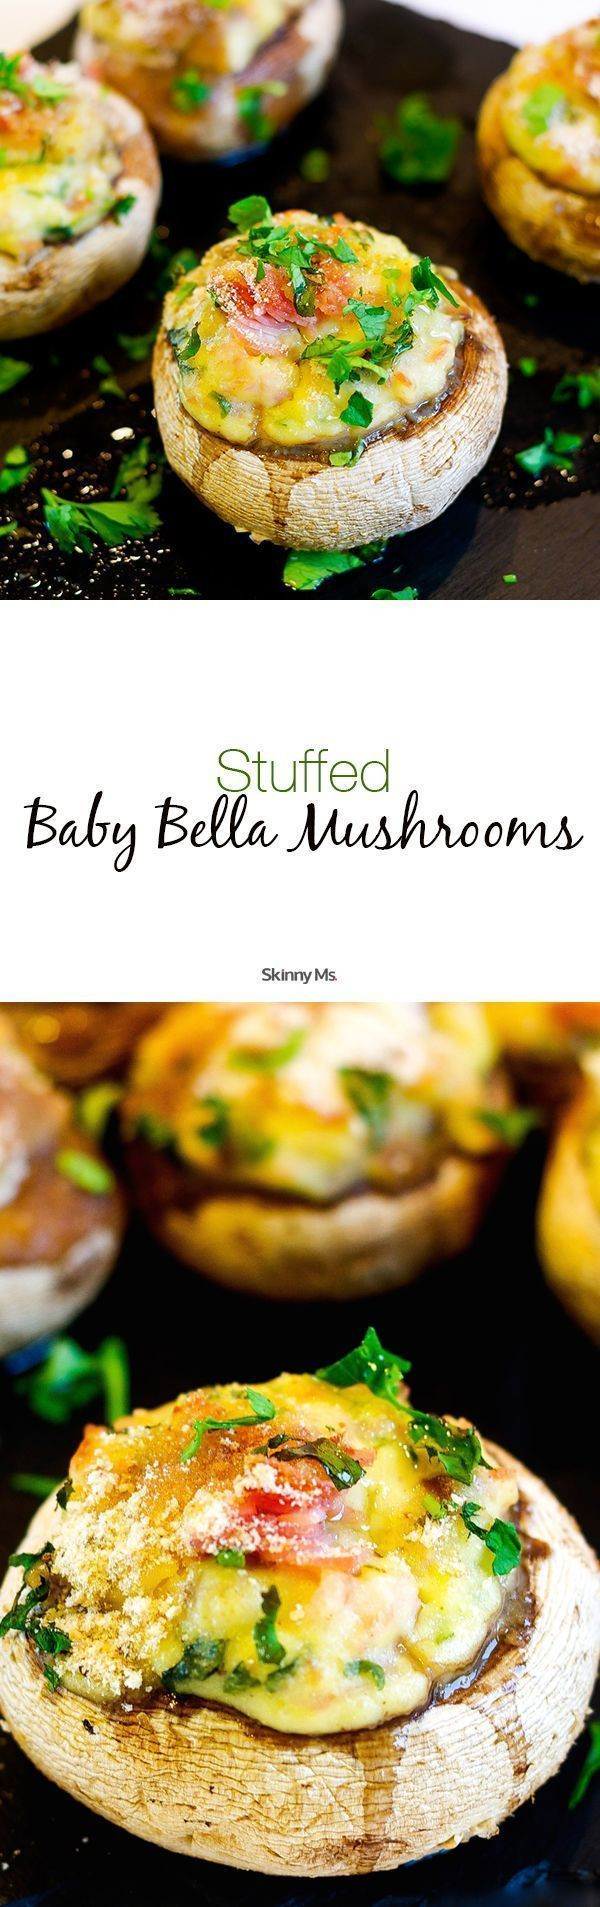 Recipes With Baby Bella Mushrooms
 Stuffed Baby Bella Mushrooms Recipe